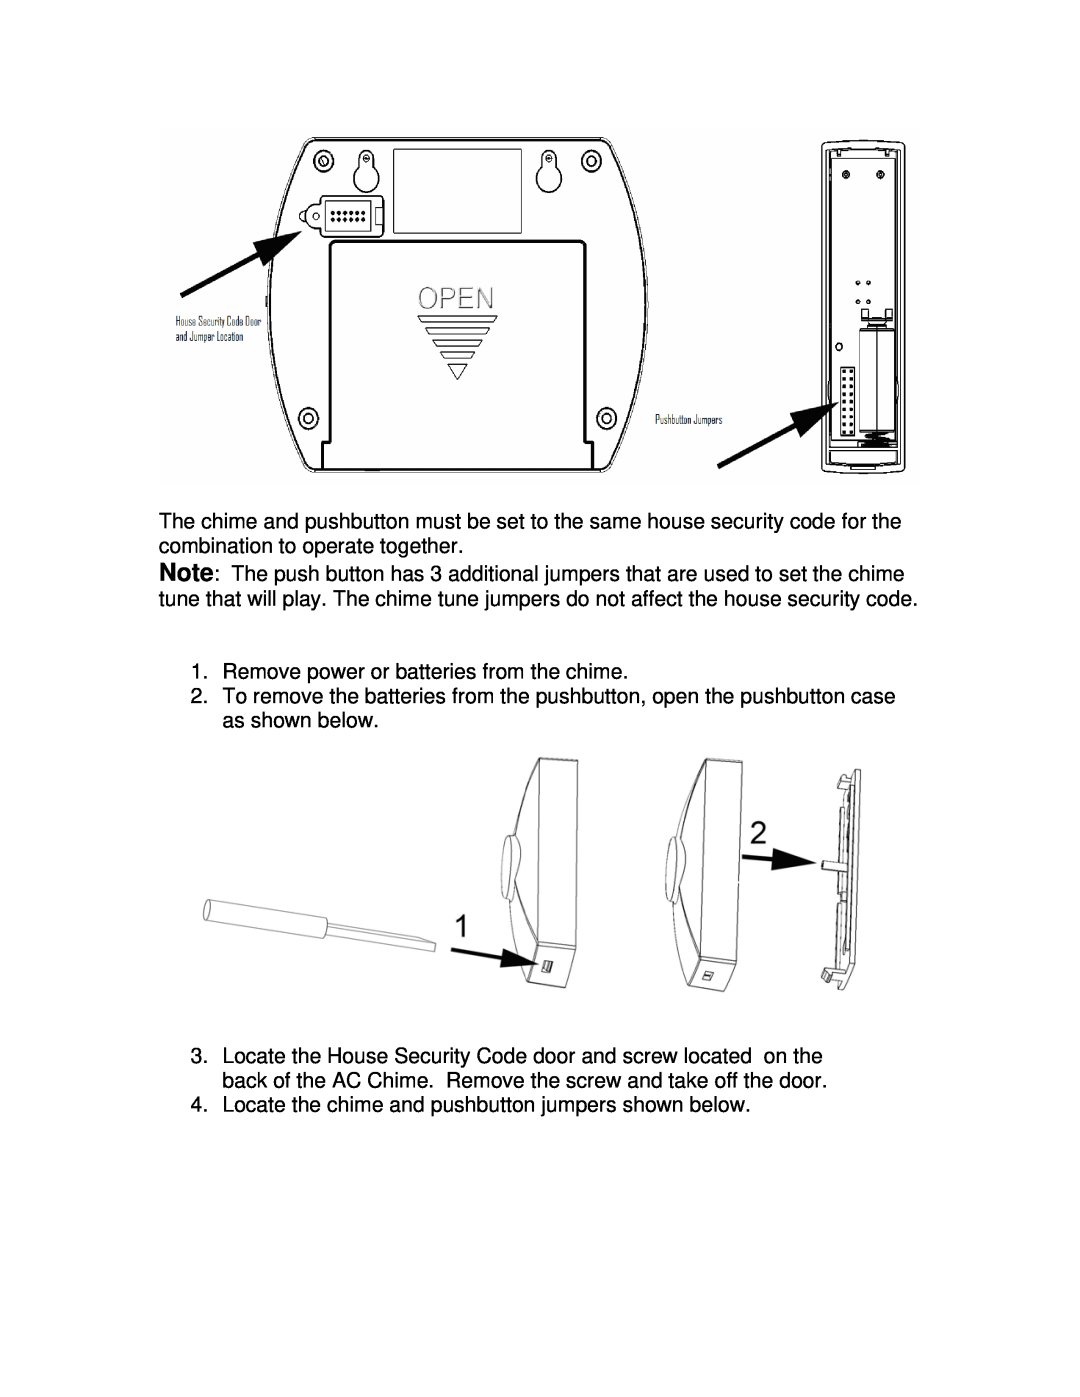 Jasco 19208 installation instructions Remove power or batteries from the chime 